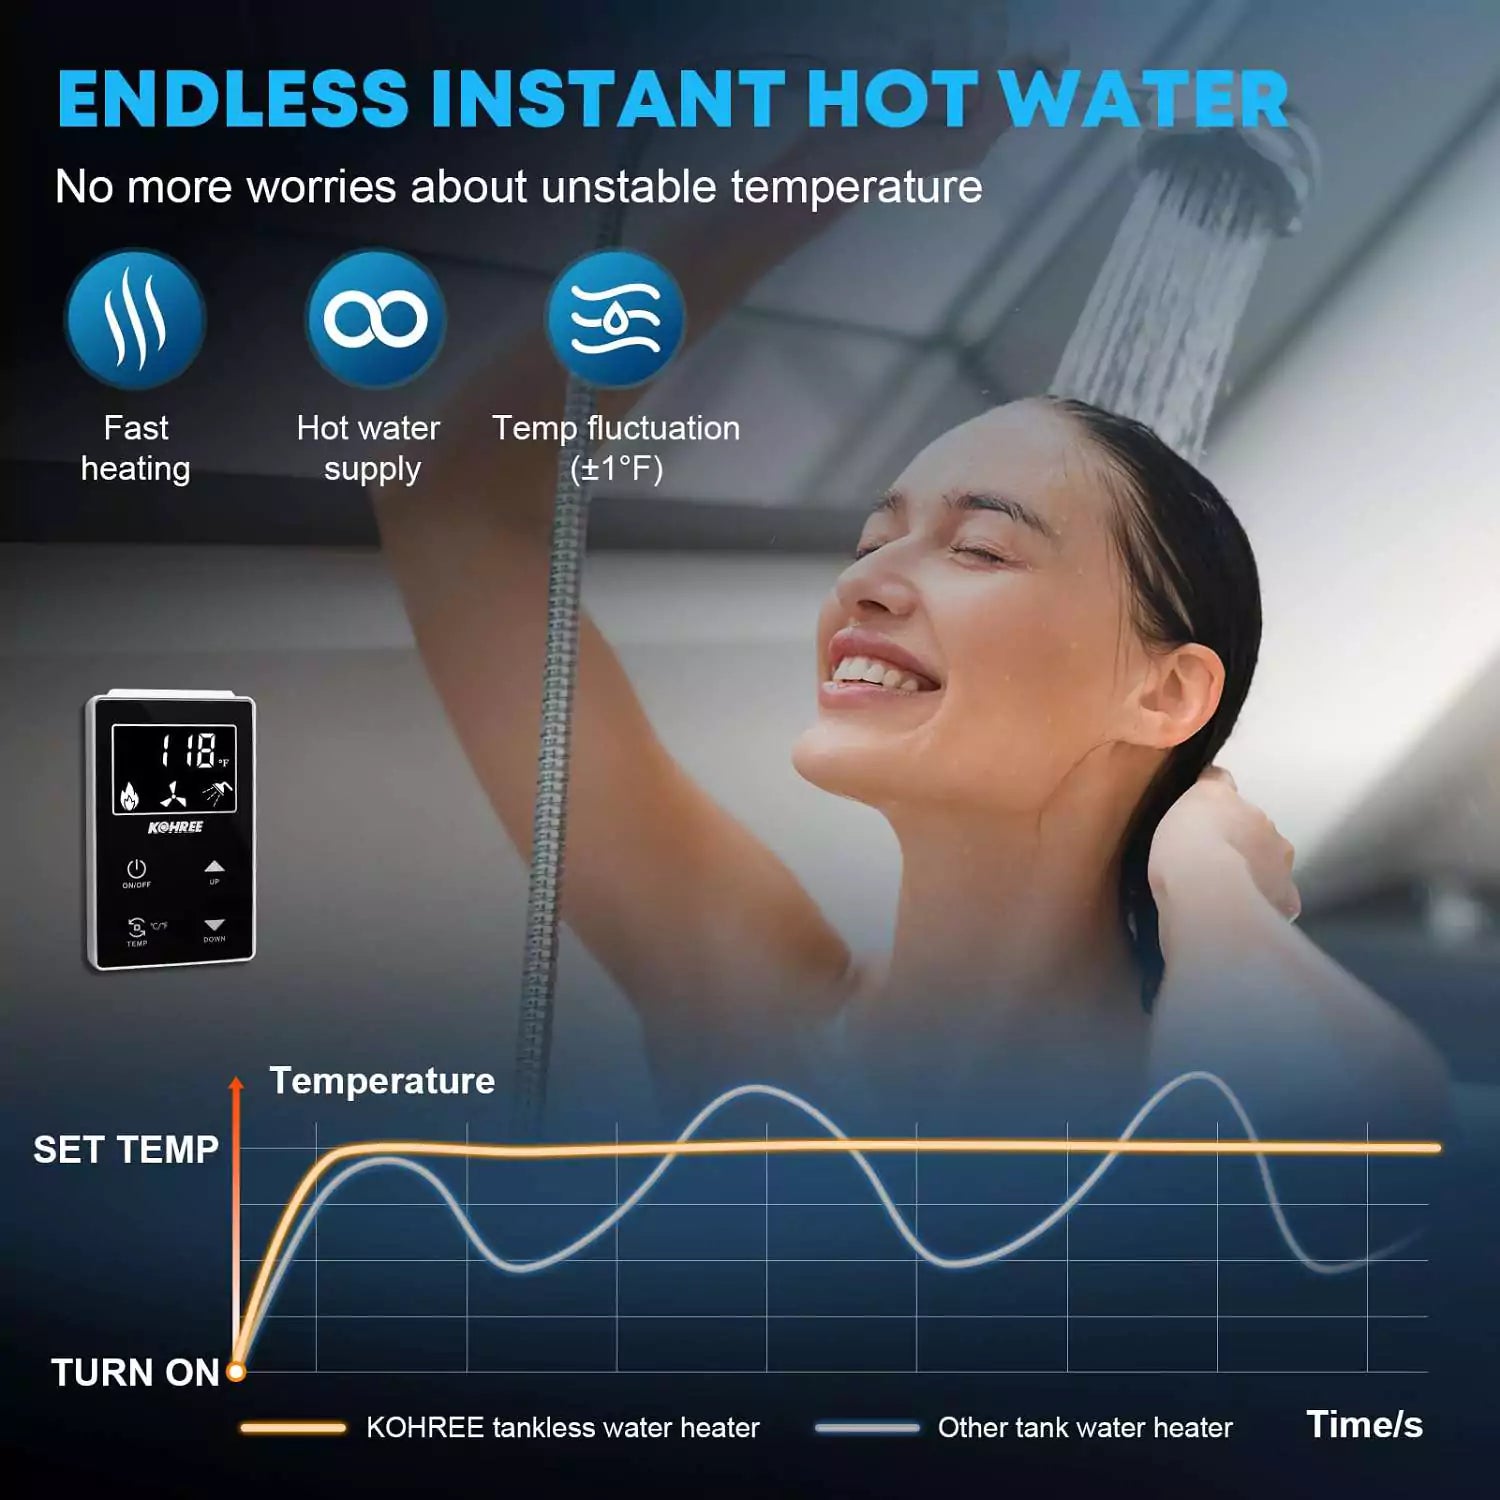 Endless instant hot water with RV on demand water heater